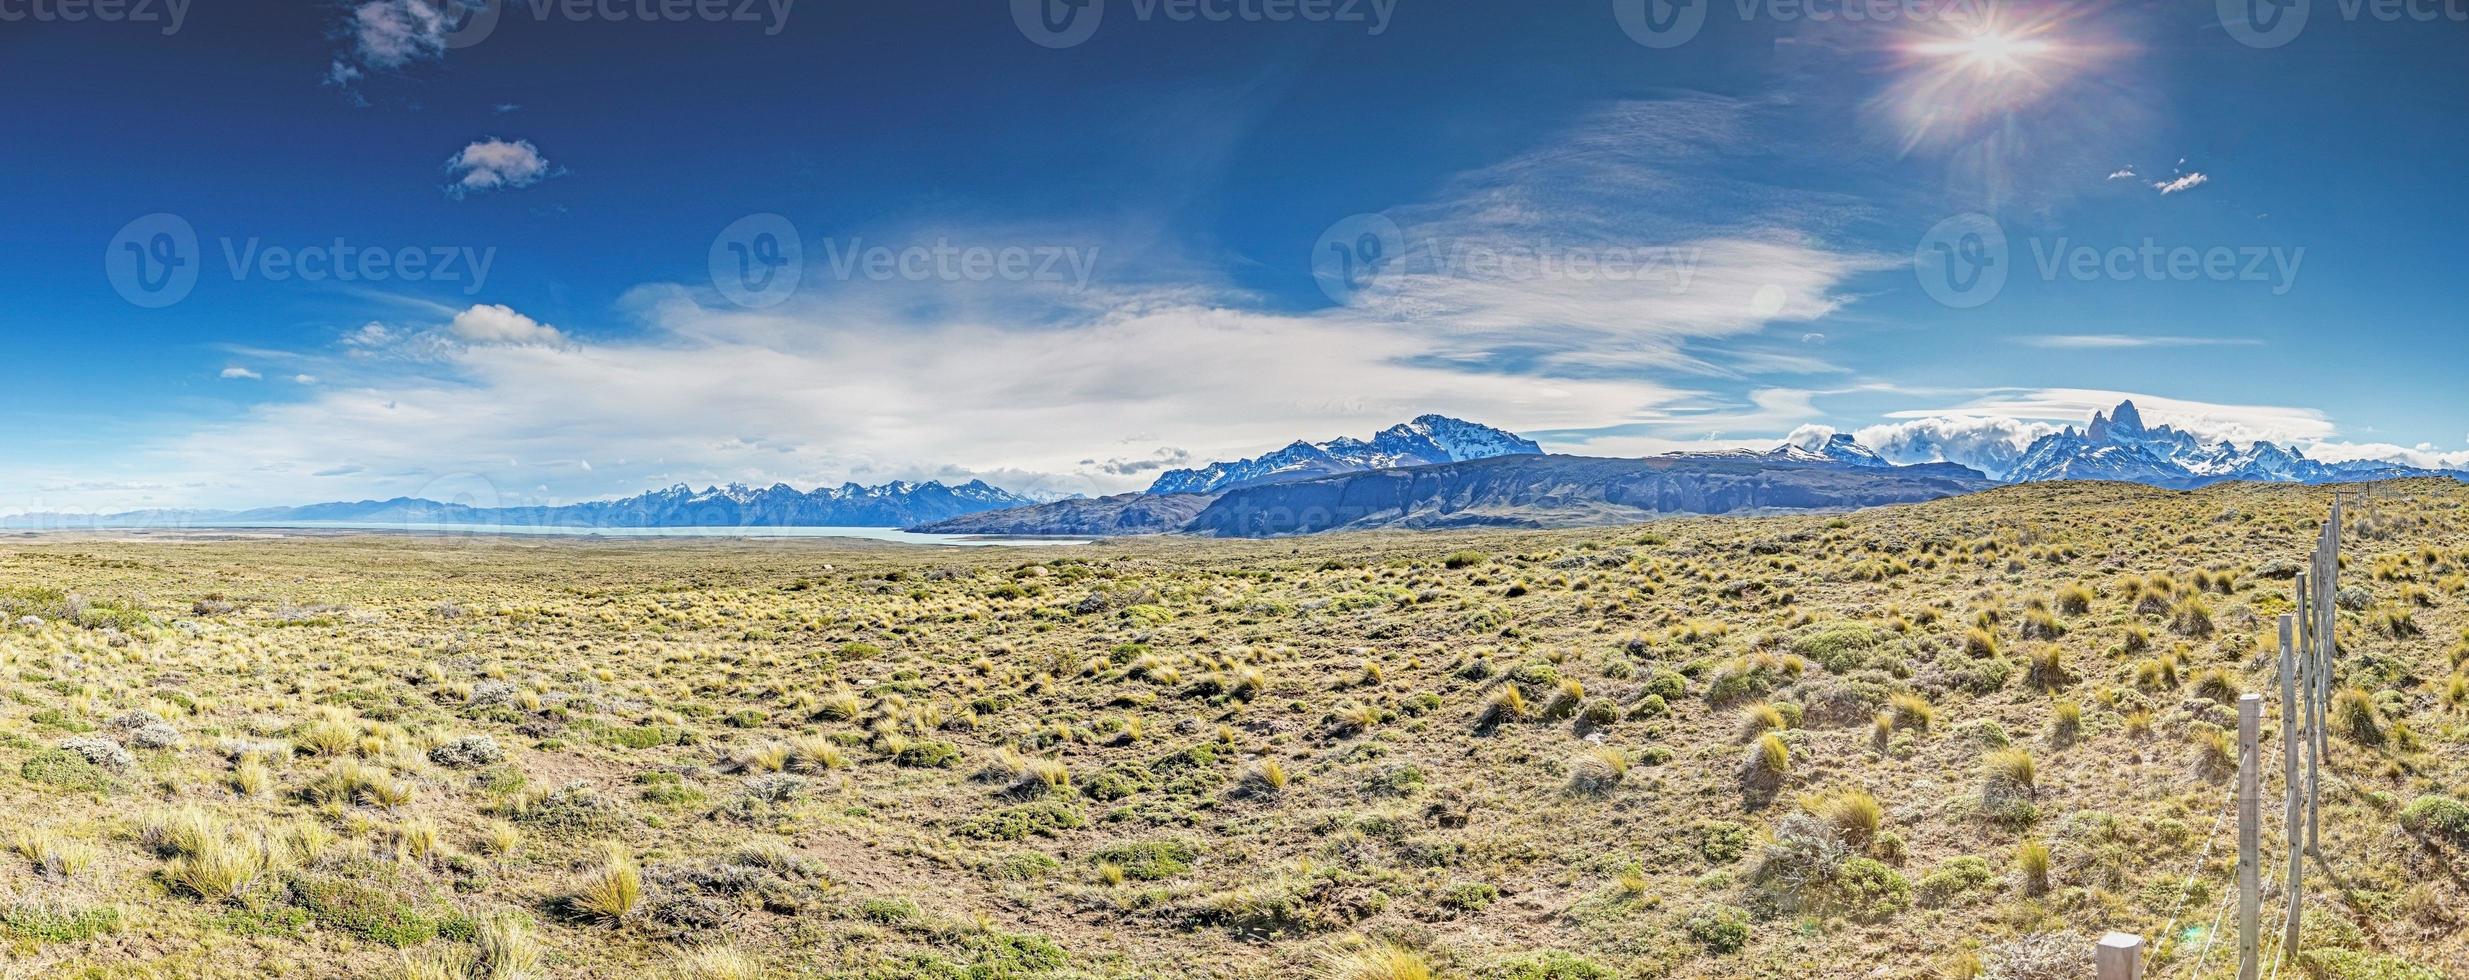 Panoramic image over the Argentine steppe with view of Patagonia mountain range with Cerro Torre and Mount Fitz Roy photo